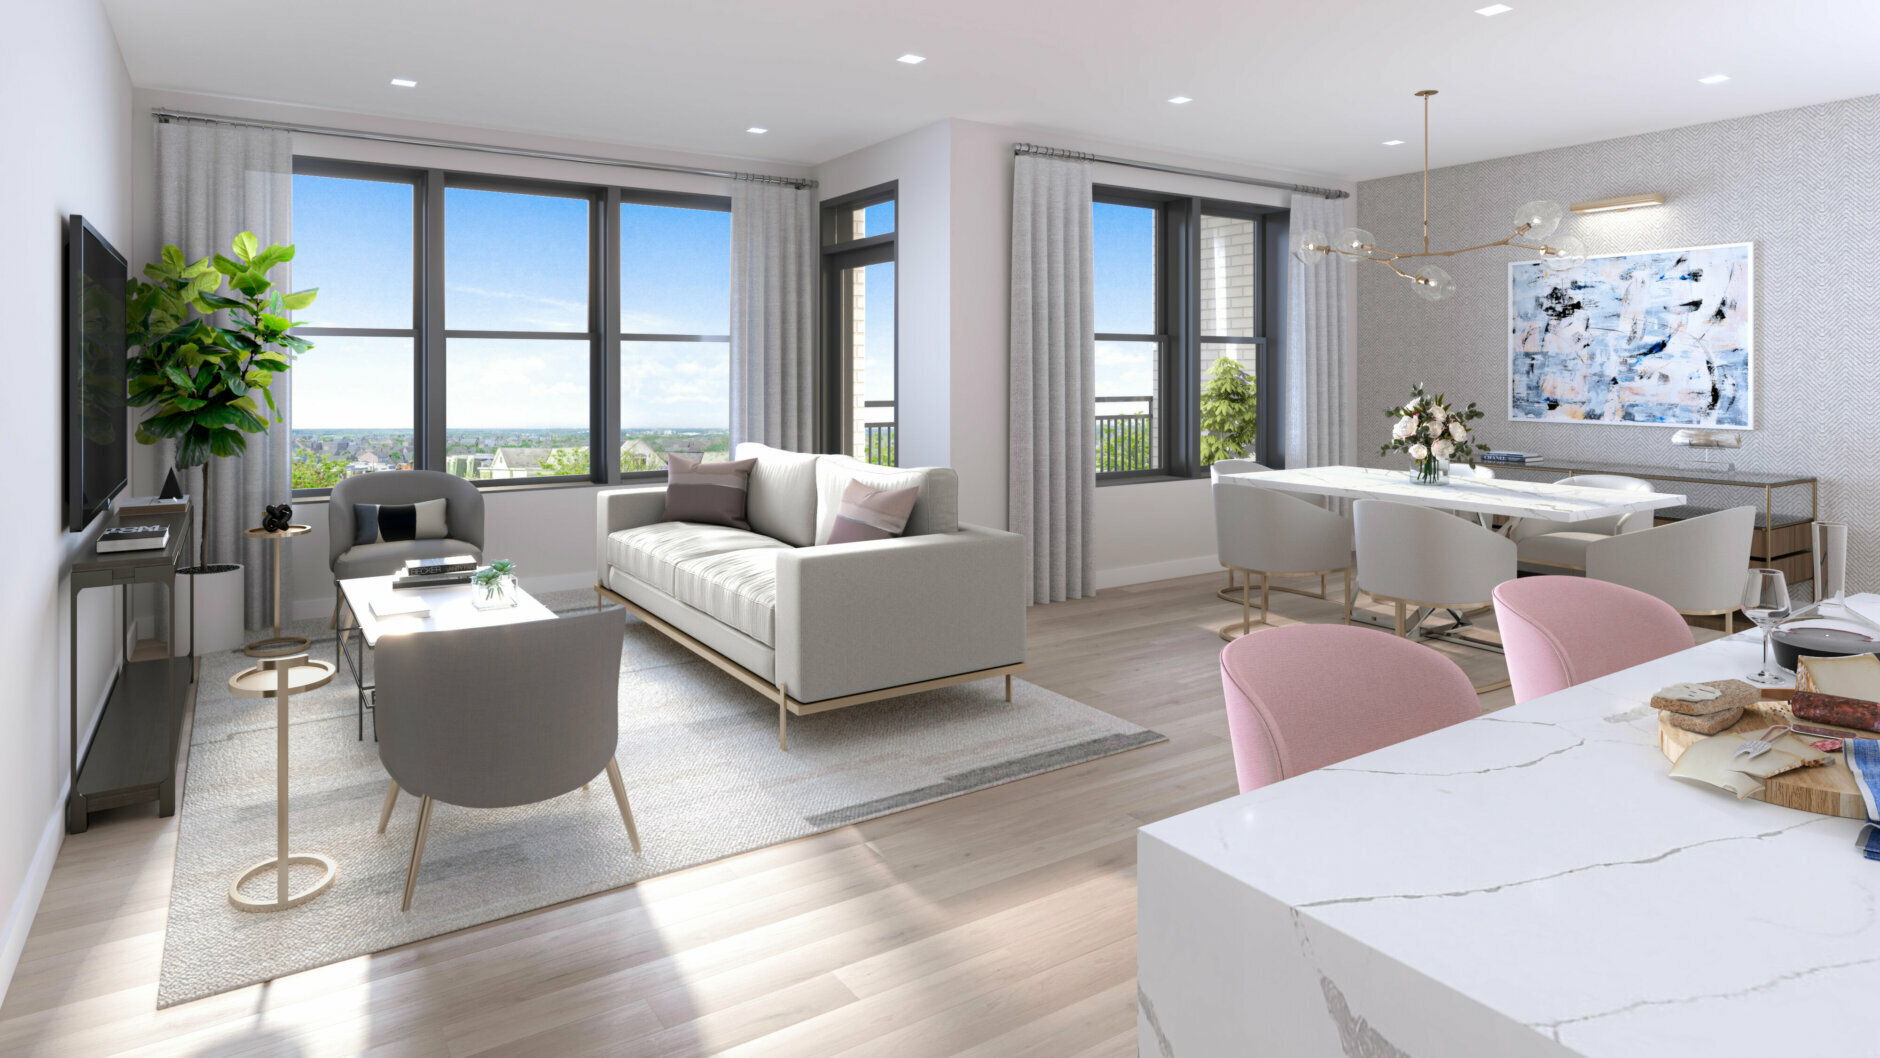 The 138-unit condominium building, called Dylan, will have one-, two- and three-bedroom condos averaging 1,200 square feet and priced from the $600,000s to more than $1 million.